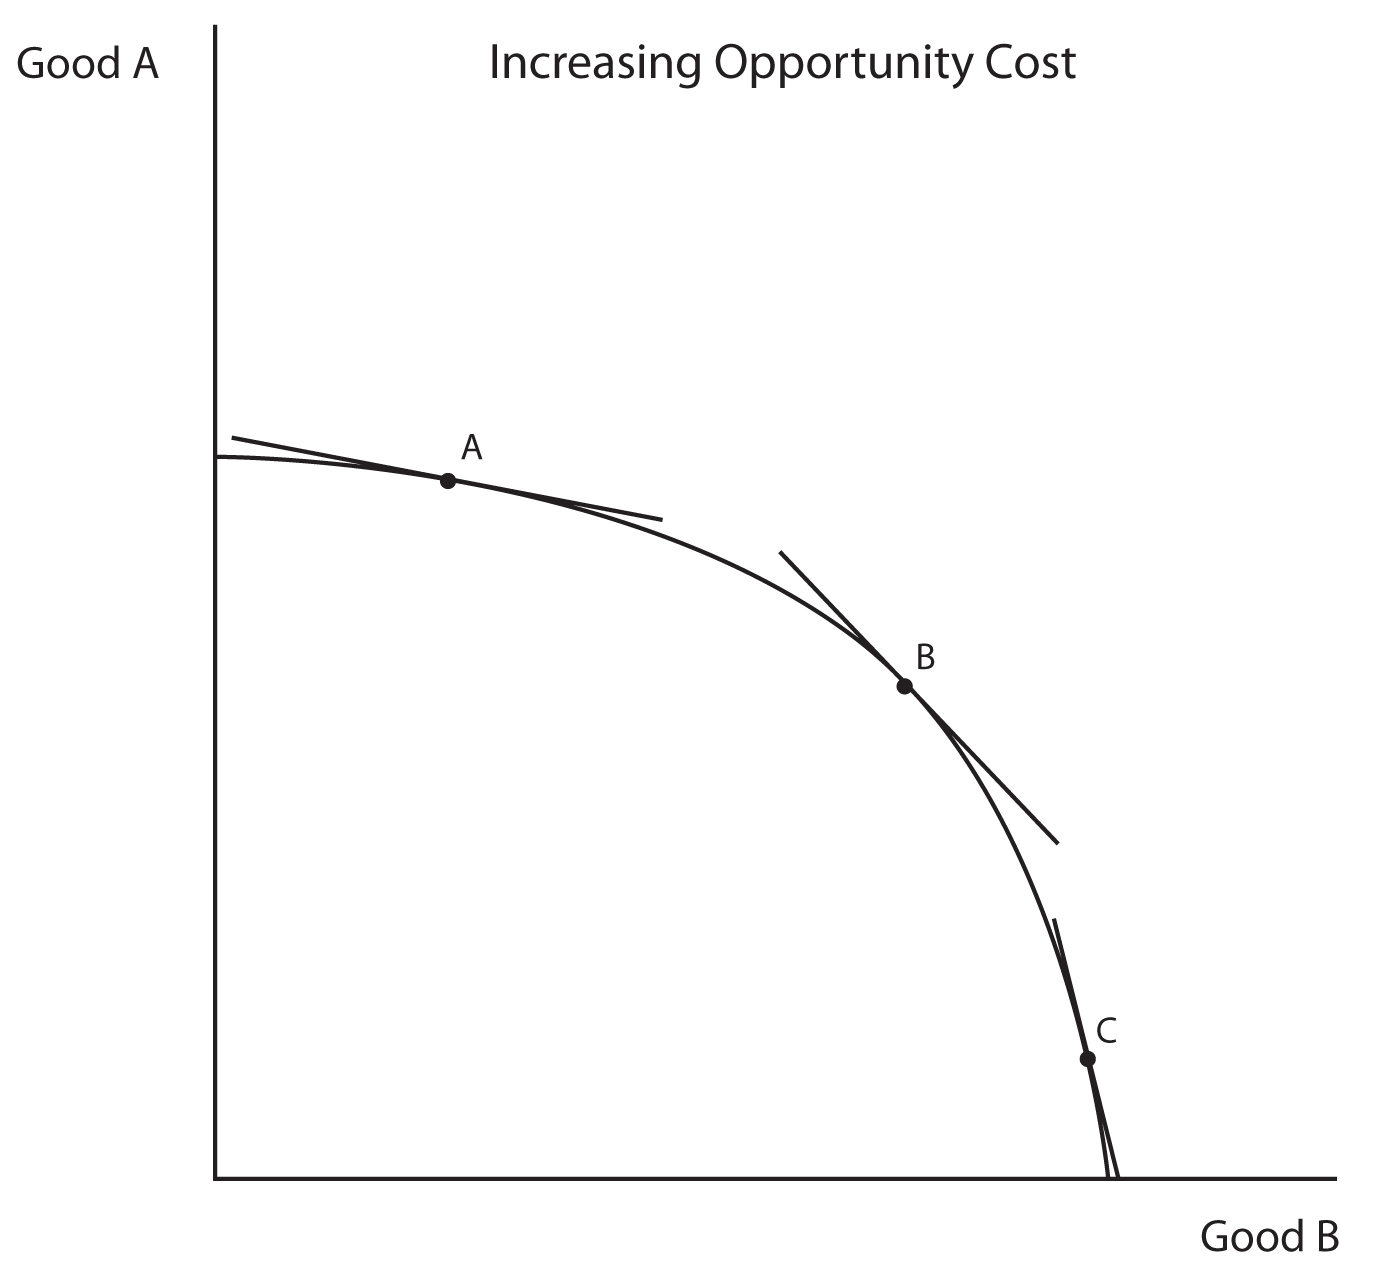 Description: Description: Image 1.04: Increasing Opportunity Cost. This image shows a graph with Good A on the X axis and Good B on the Y axis.  The graph contains a downward sloping curved line which is concave to the origin.  Three points lie on this line: from left to right, they are A, B, and C.  At each of these points a short, straight line intersects the curve at a tangent.